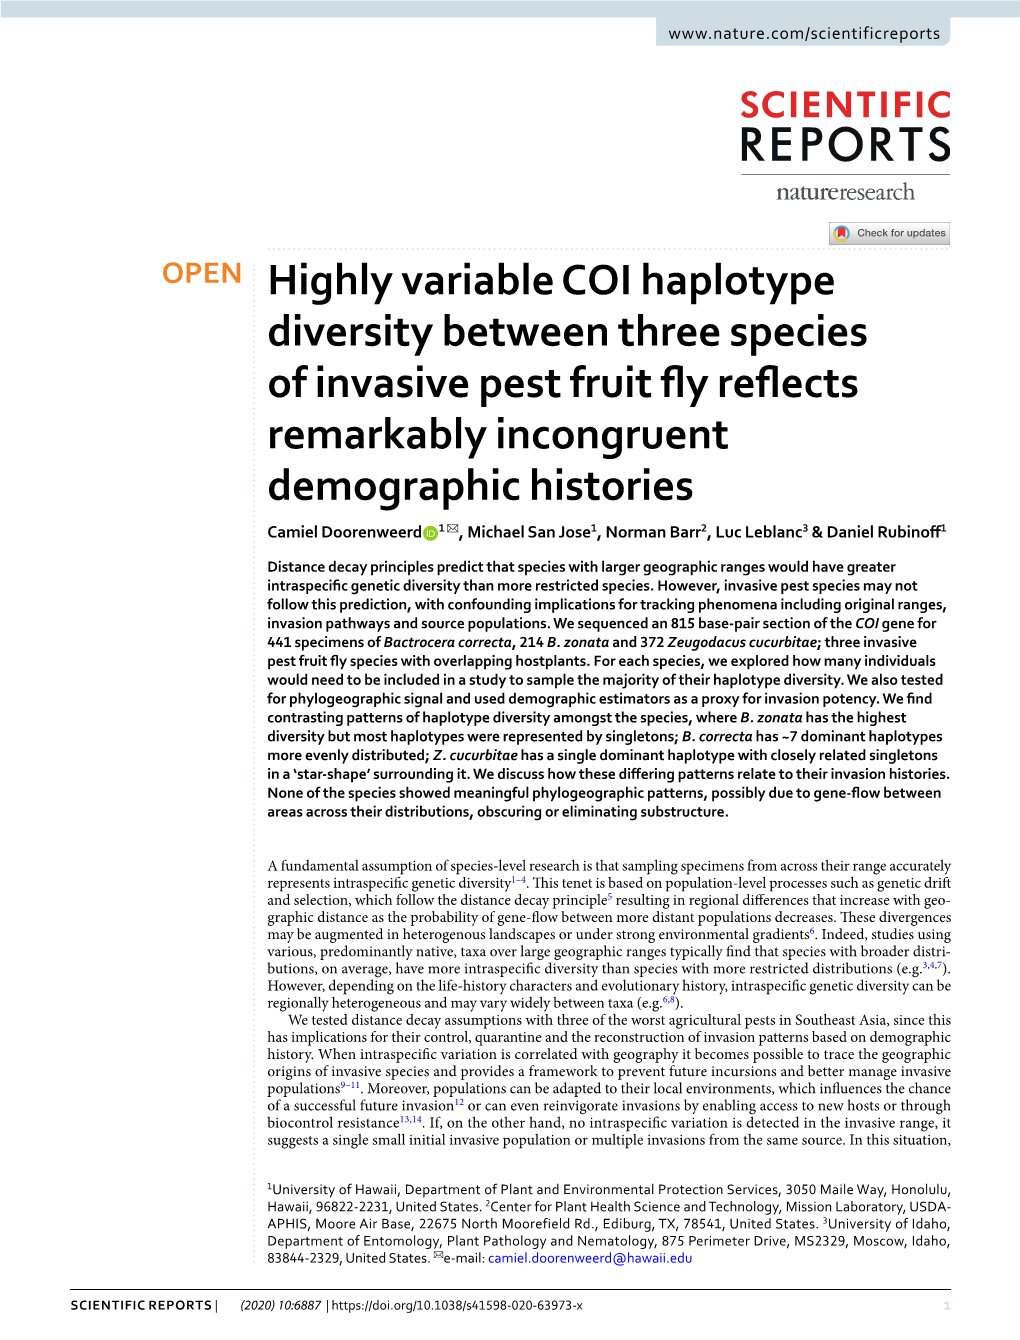 Highly Variable COI Haplotype Diversity Between Three Species Of